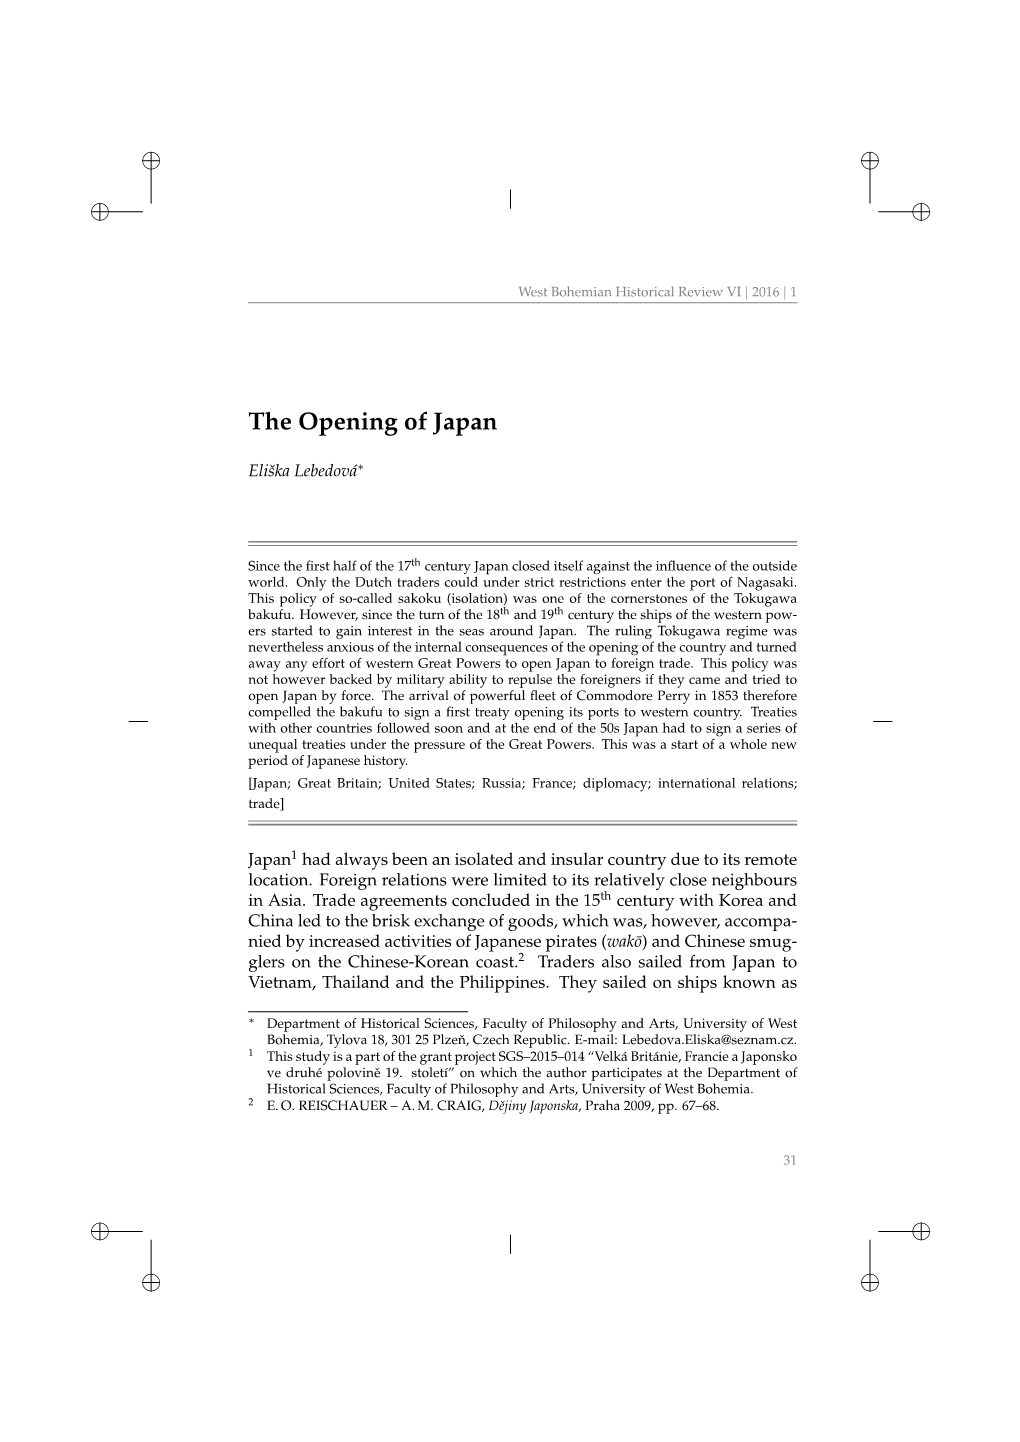 The Opening of Japan